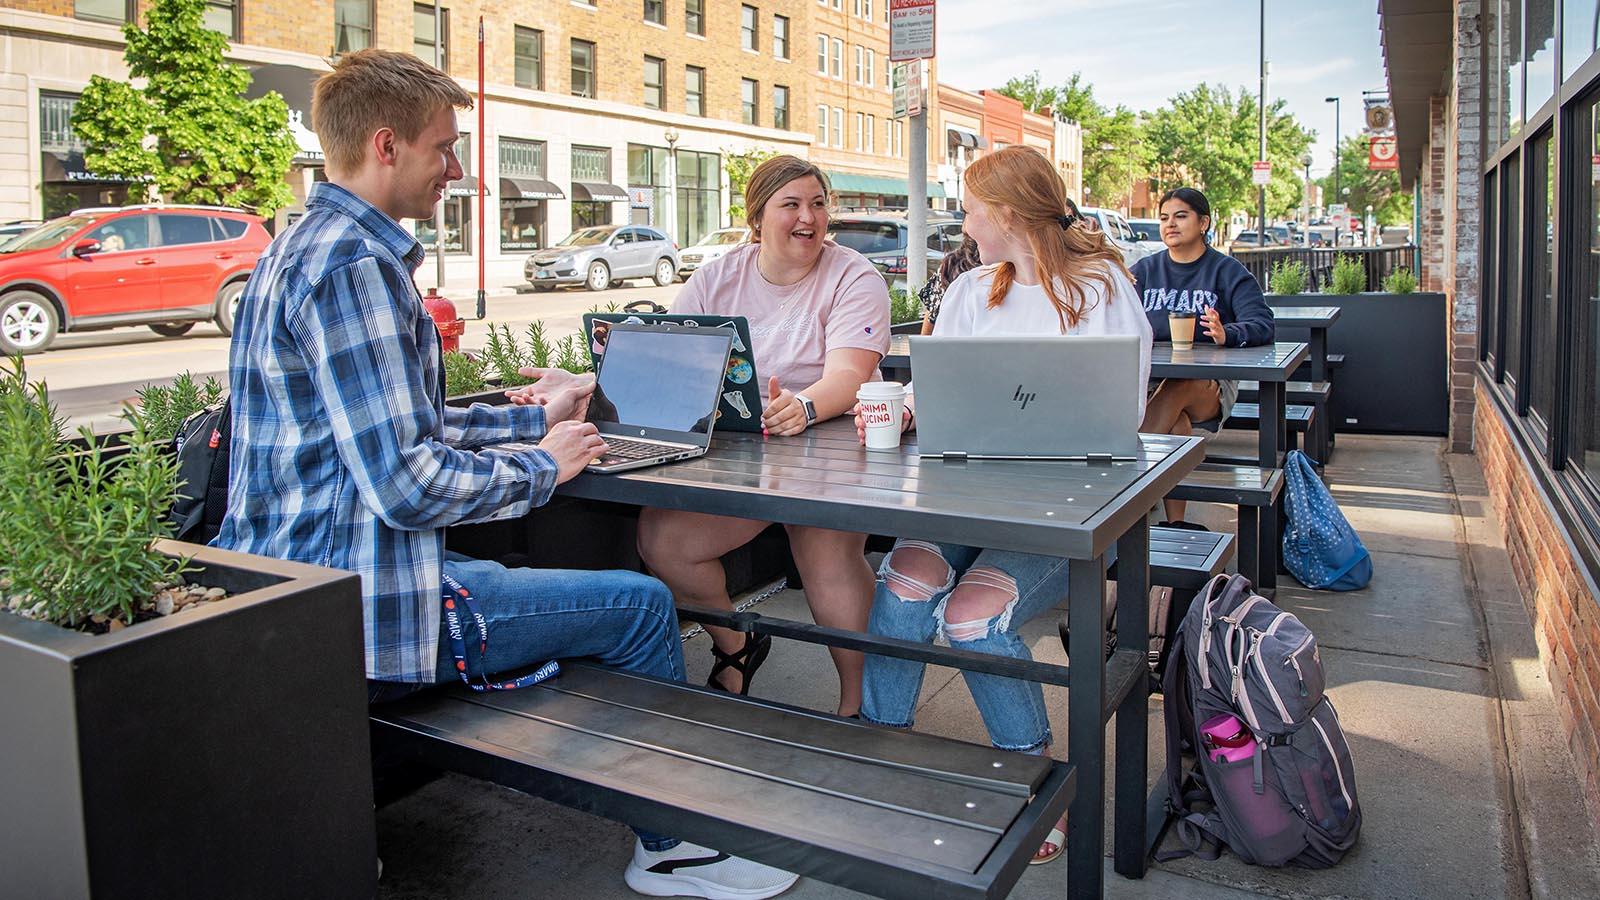 Four Year-Round Campus students studying at a downtown Bismarck business.